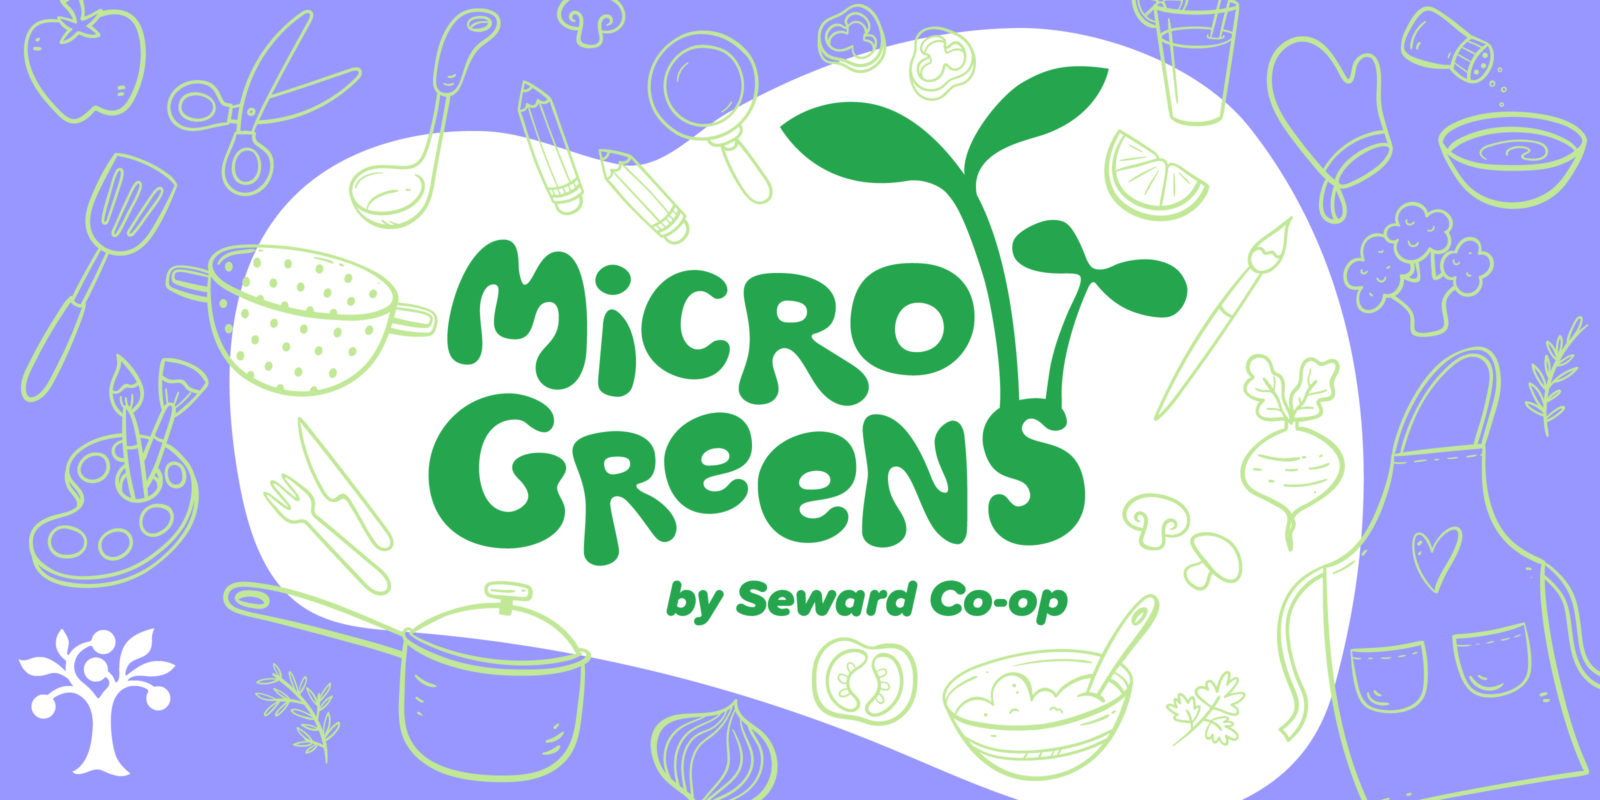 A graphic with a periwinkle background and small green illustrations that reads "Microgreens" in the center